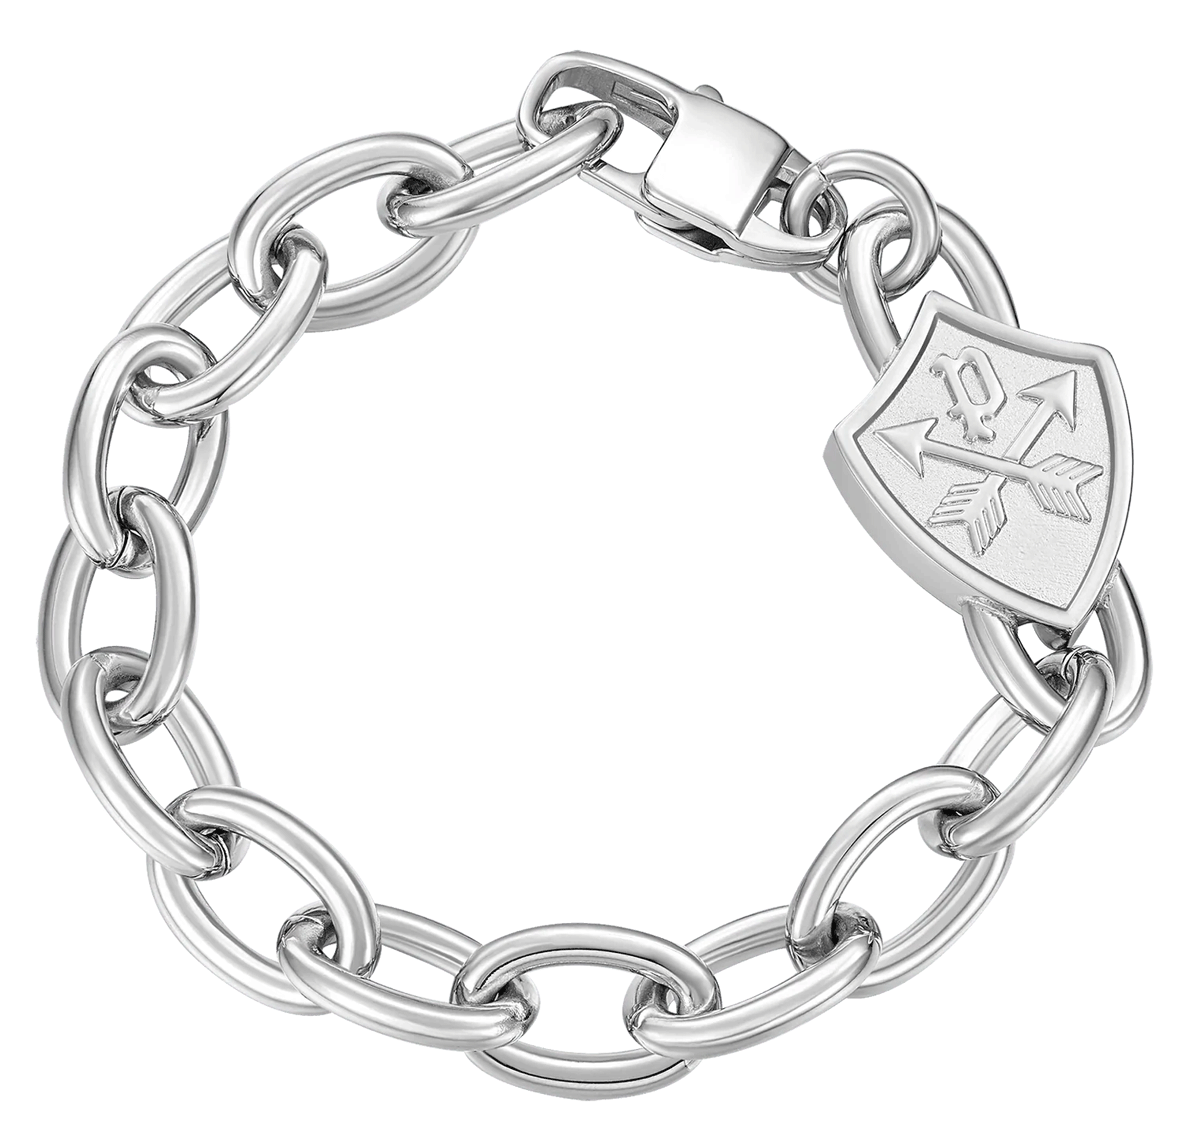 Heritage Crest Bracelet 61,00 at By € Police | | Starting IRISIMO Men PEAGB0001617 For